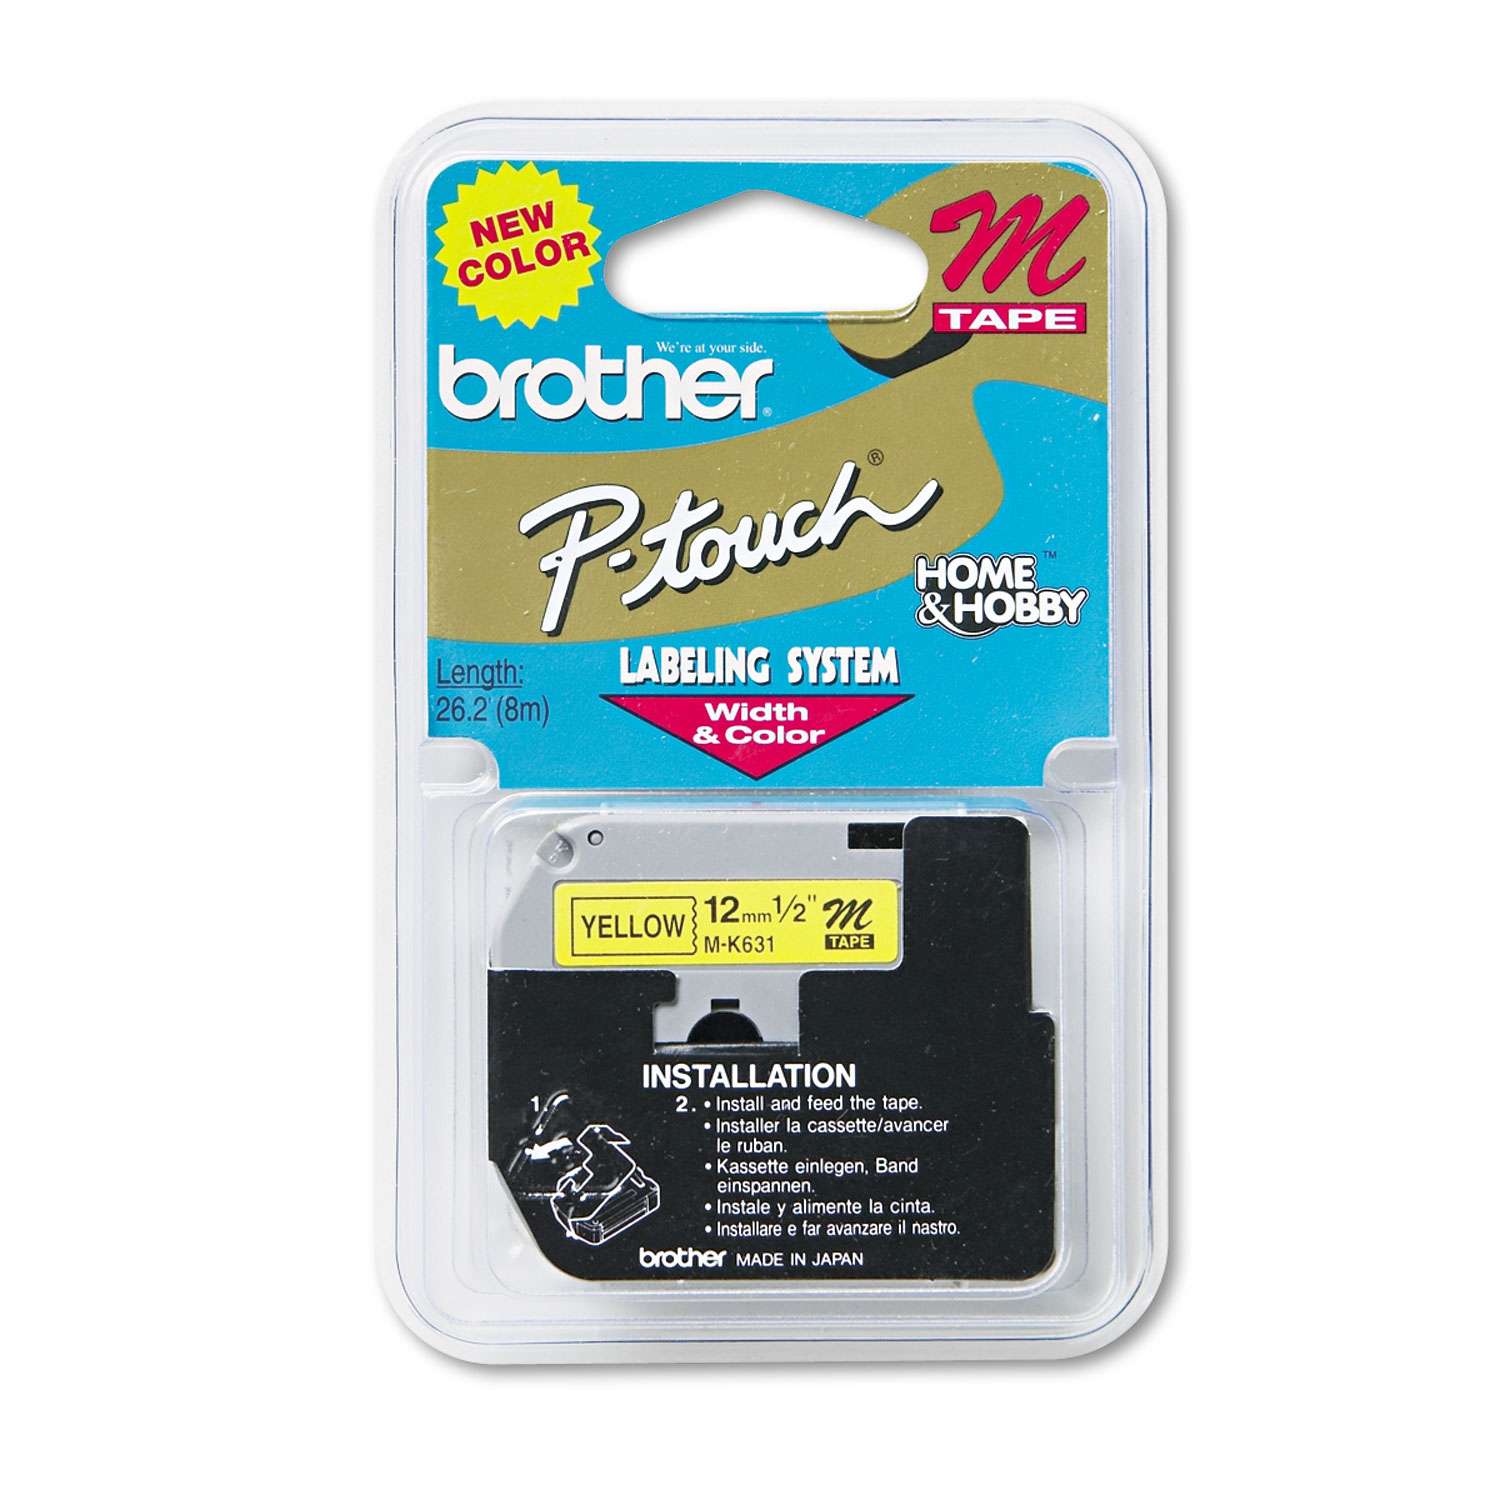  Brother P-Touch MK631 M Series Tape Cartridge for P-Touch Labelers, 0.47 x 26.2 ft, Black on Yellow (BRTMK631) 